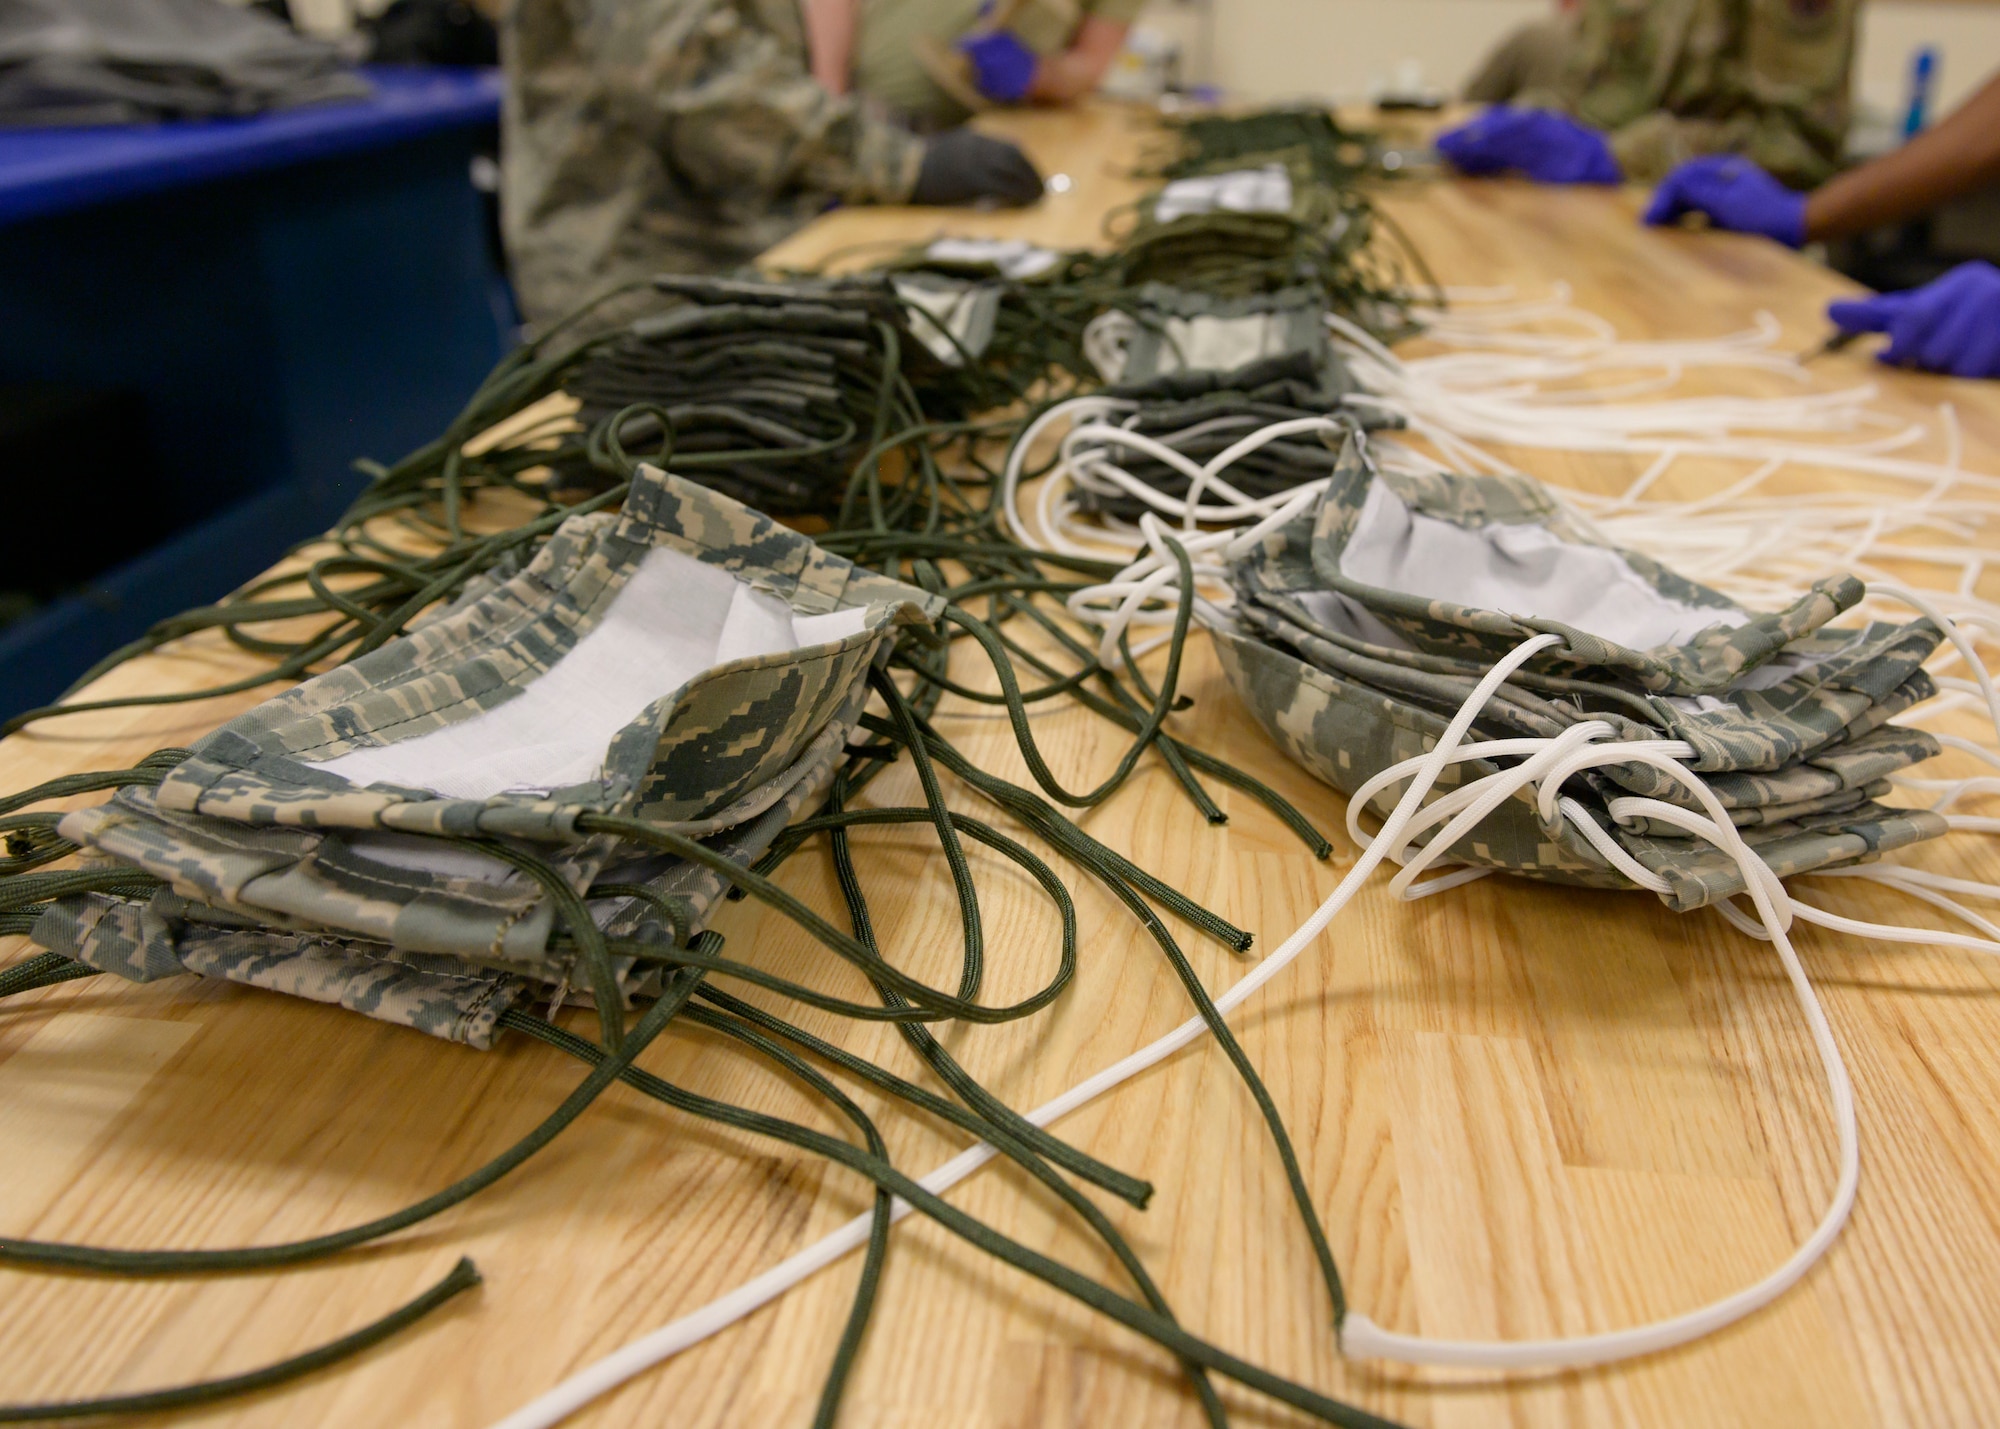 Masks made by the 366th Operations Support Squadron lay on a work table after production, March 20, 2020, at Mountain Home Air Force Base. These mask are made for people on base and help to prevent the spread of COVID-19. (U.S. Air Force photo by Senior Airman Tyrell Hall)